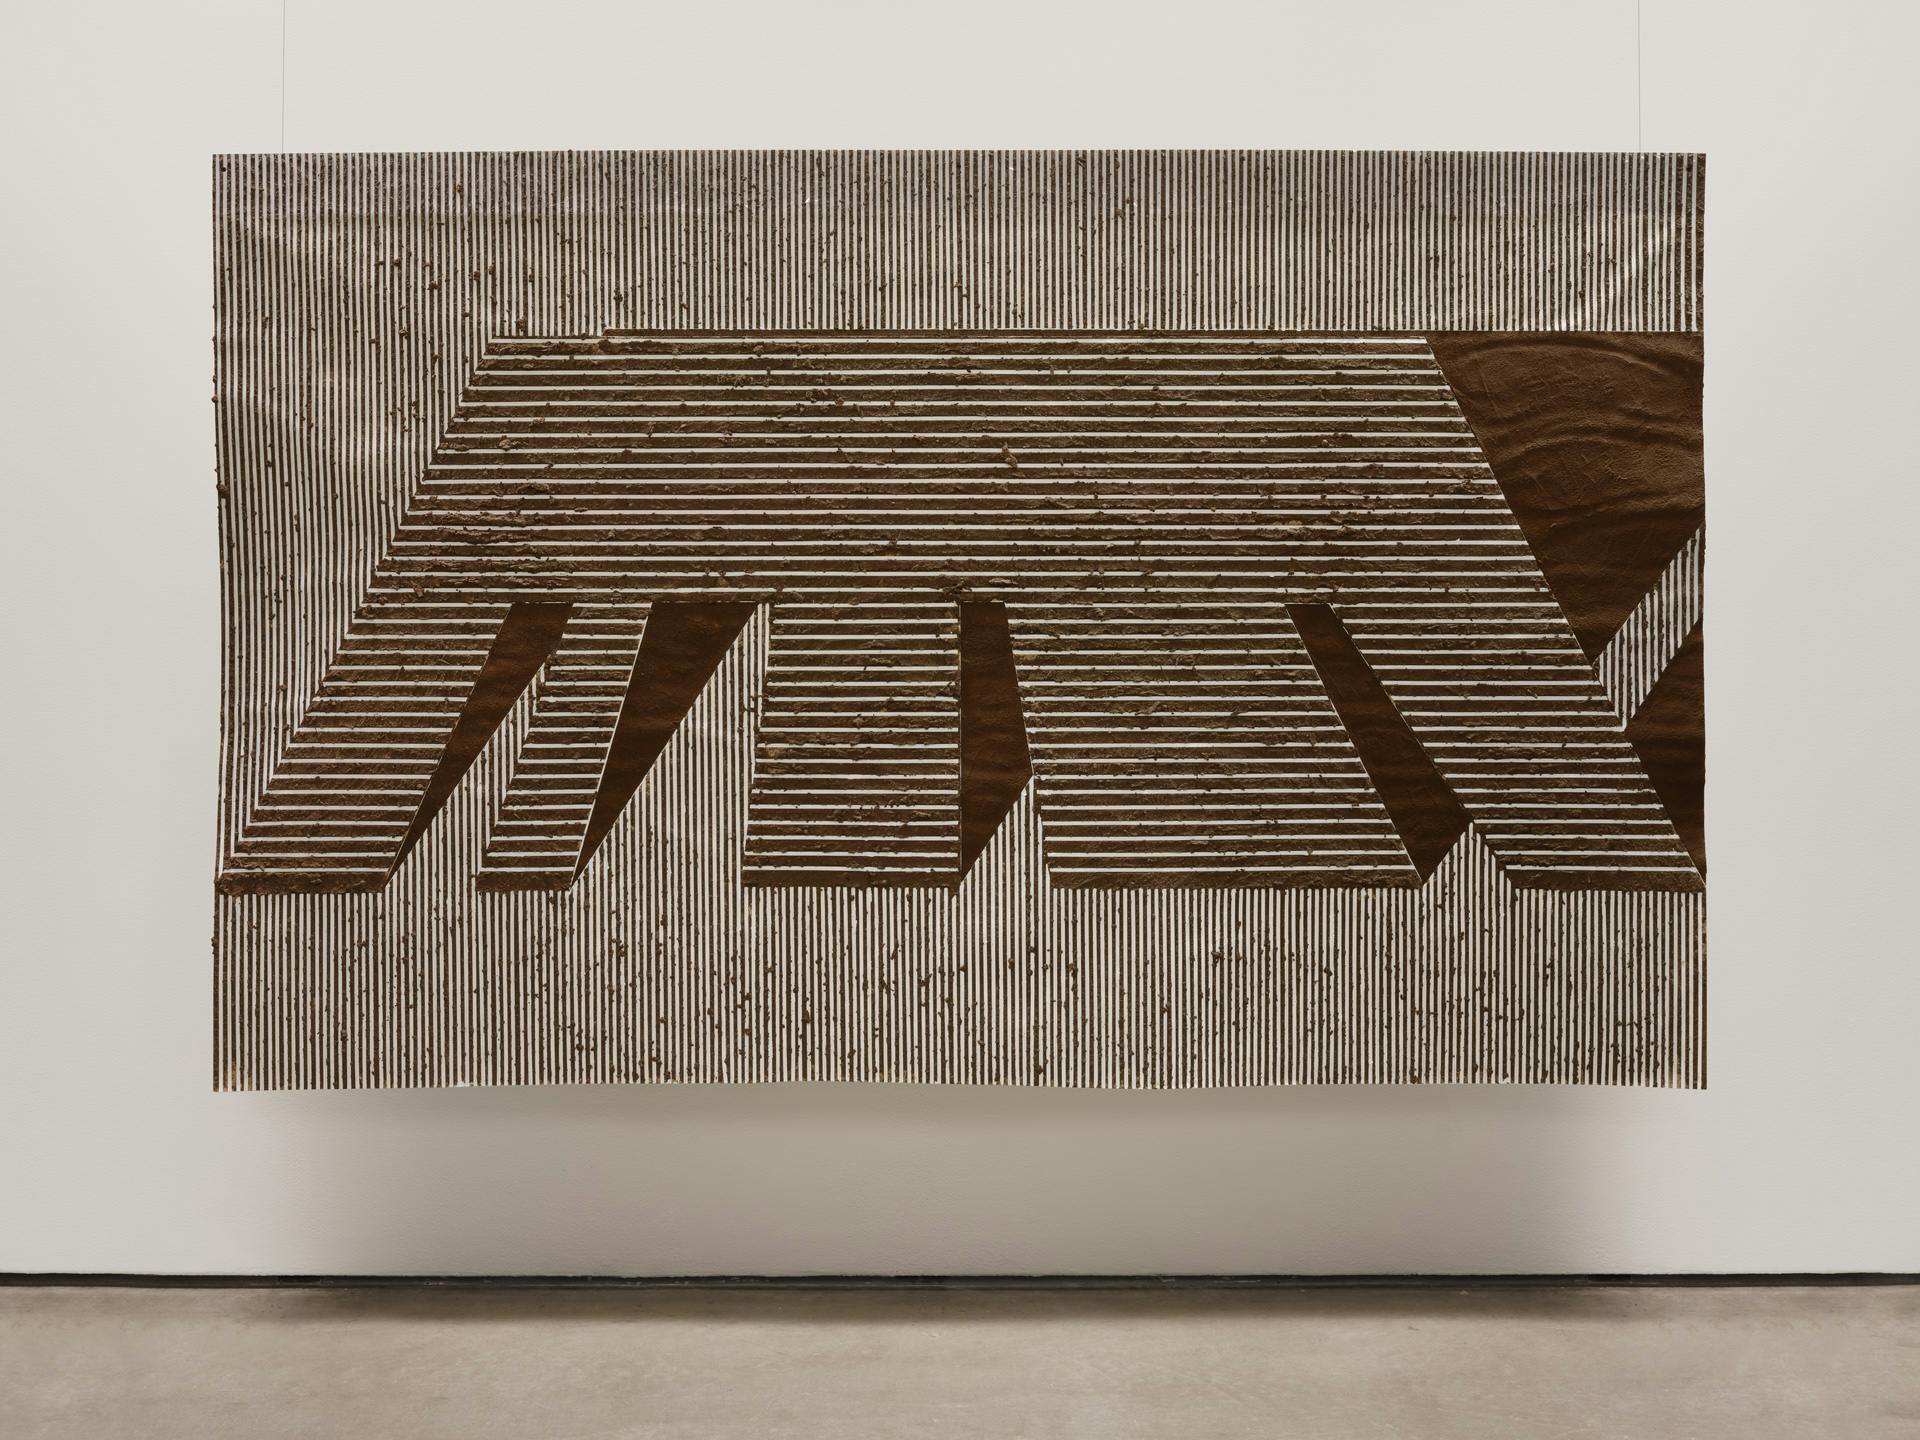 One large scale drawing is suspended against the wall of a gallery space. The drawing of an architectural form is made with striations of brown adobe mud on white paper. 